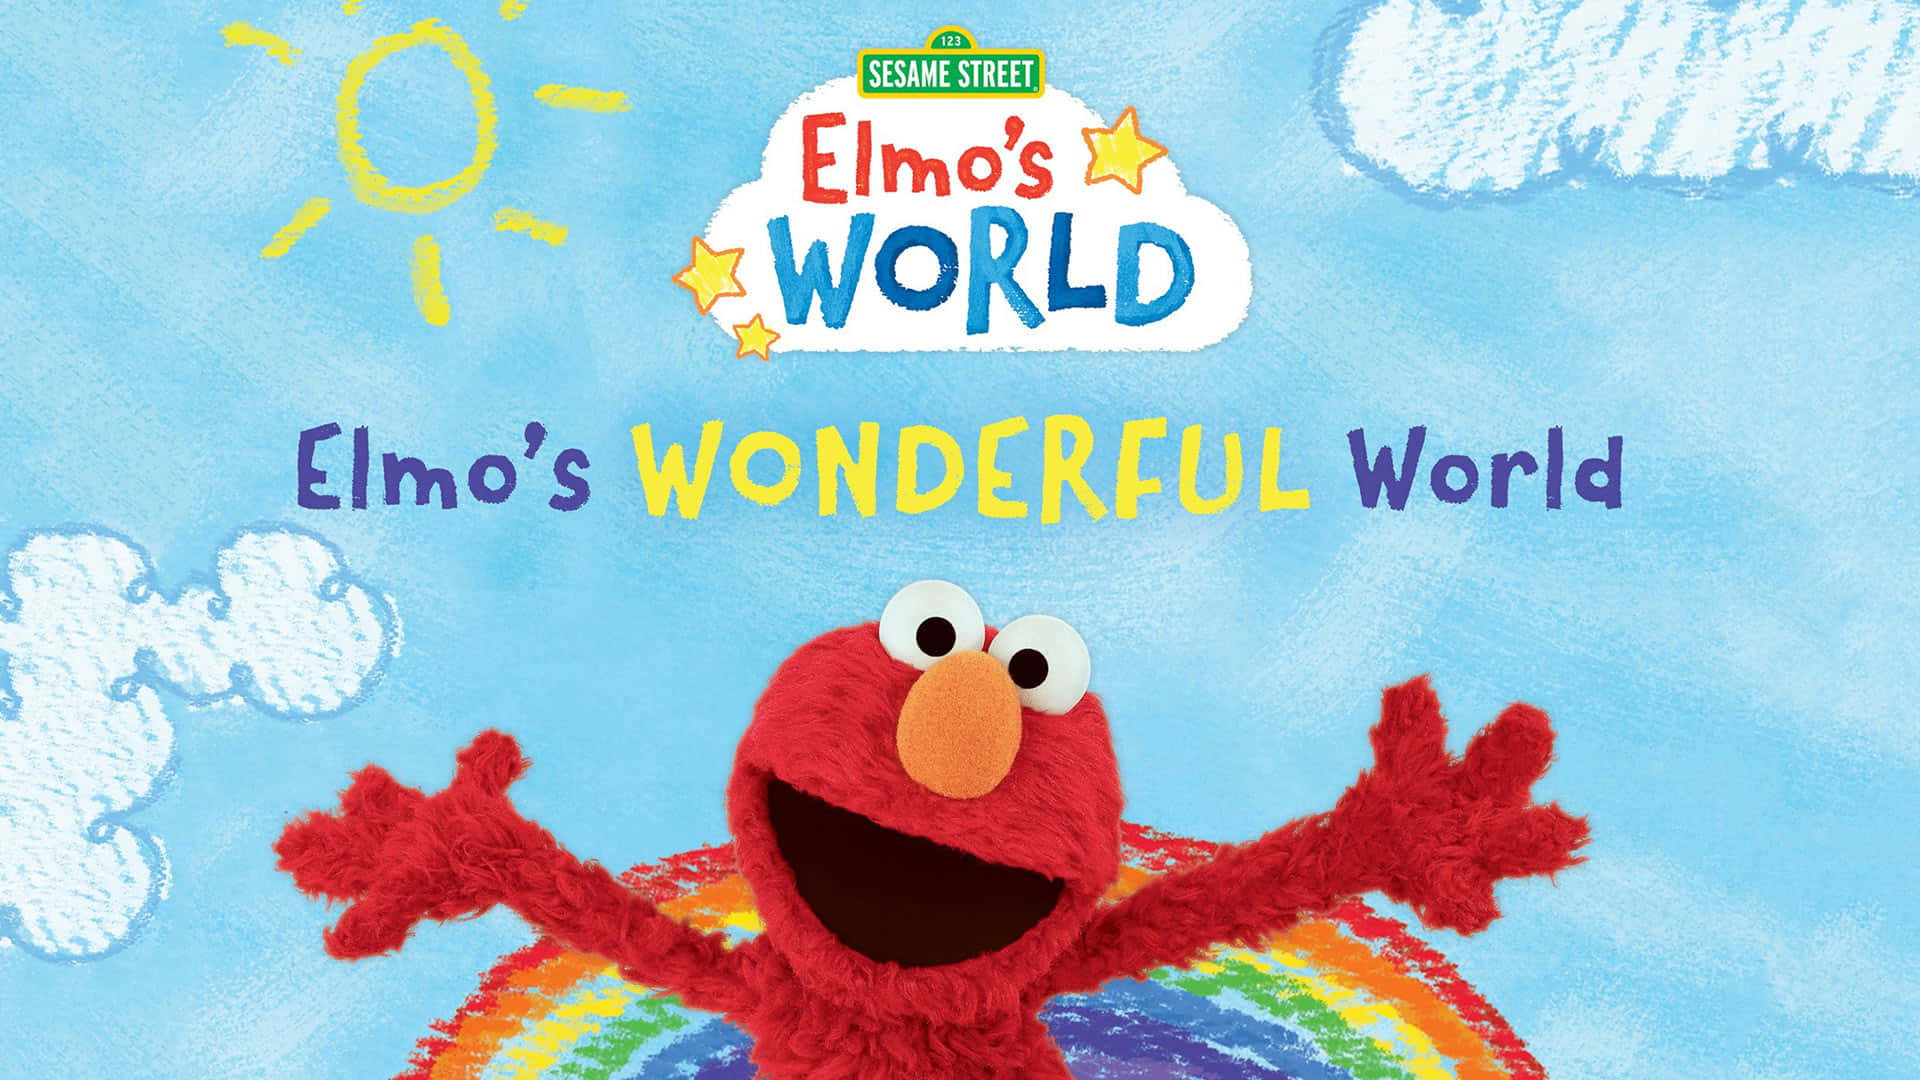 Elmo's World is the Best Place to Be!